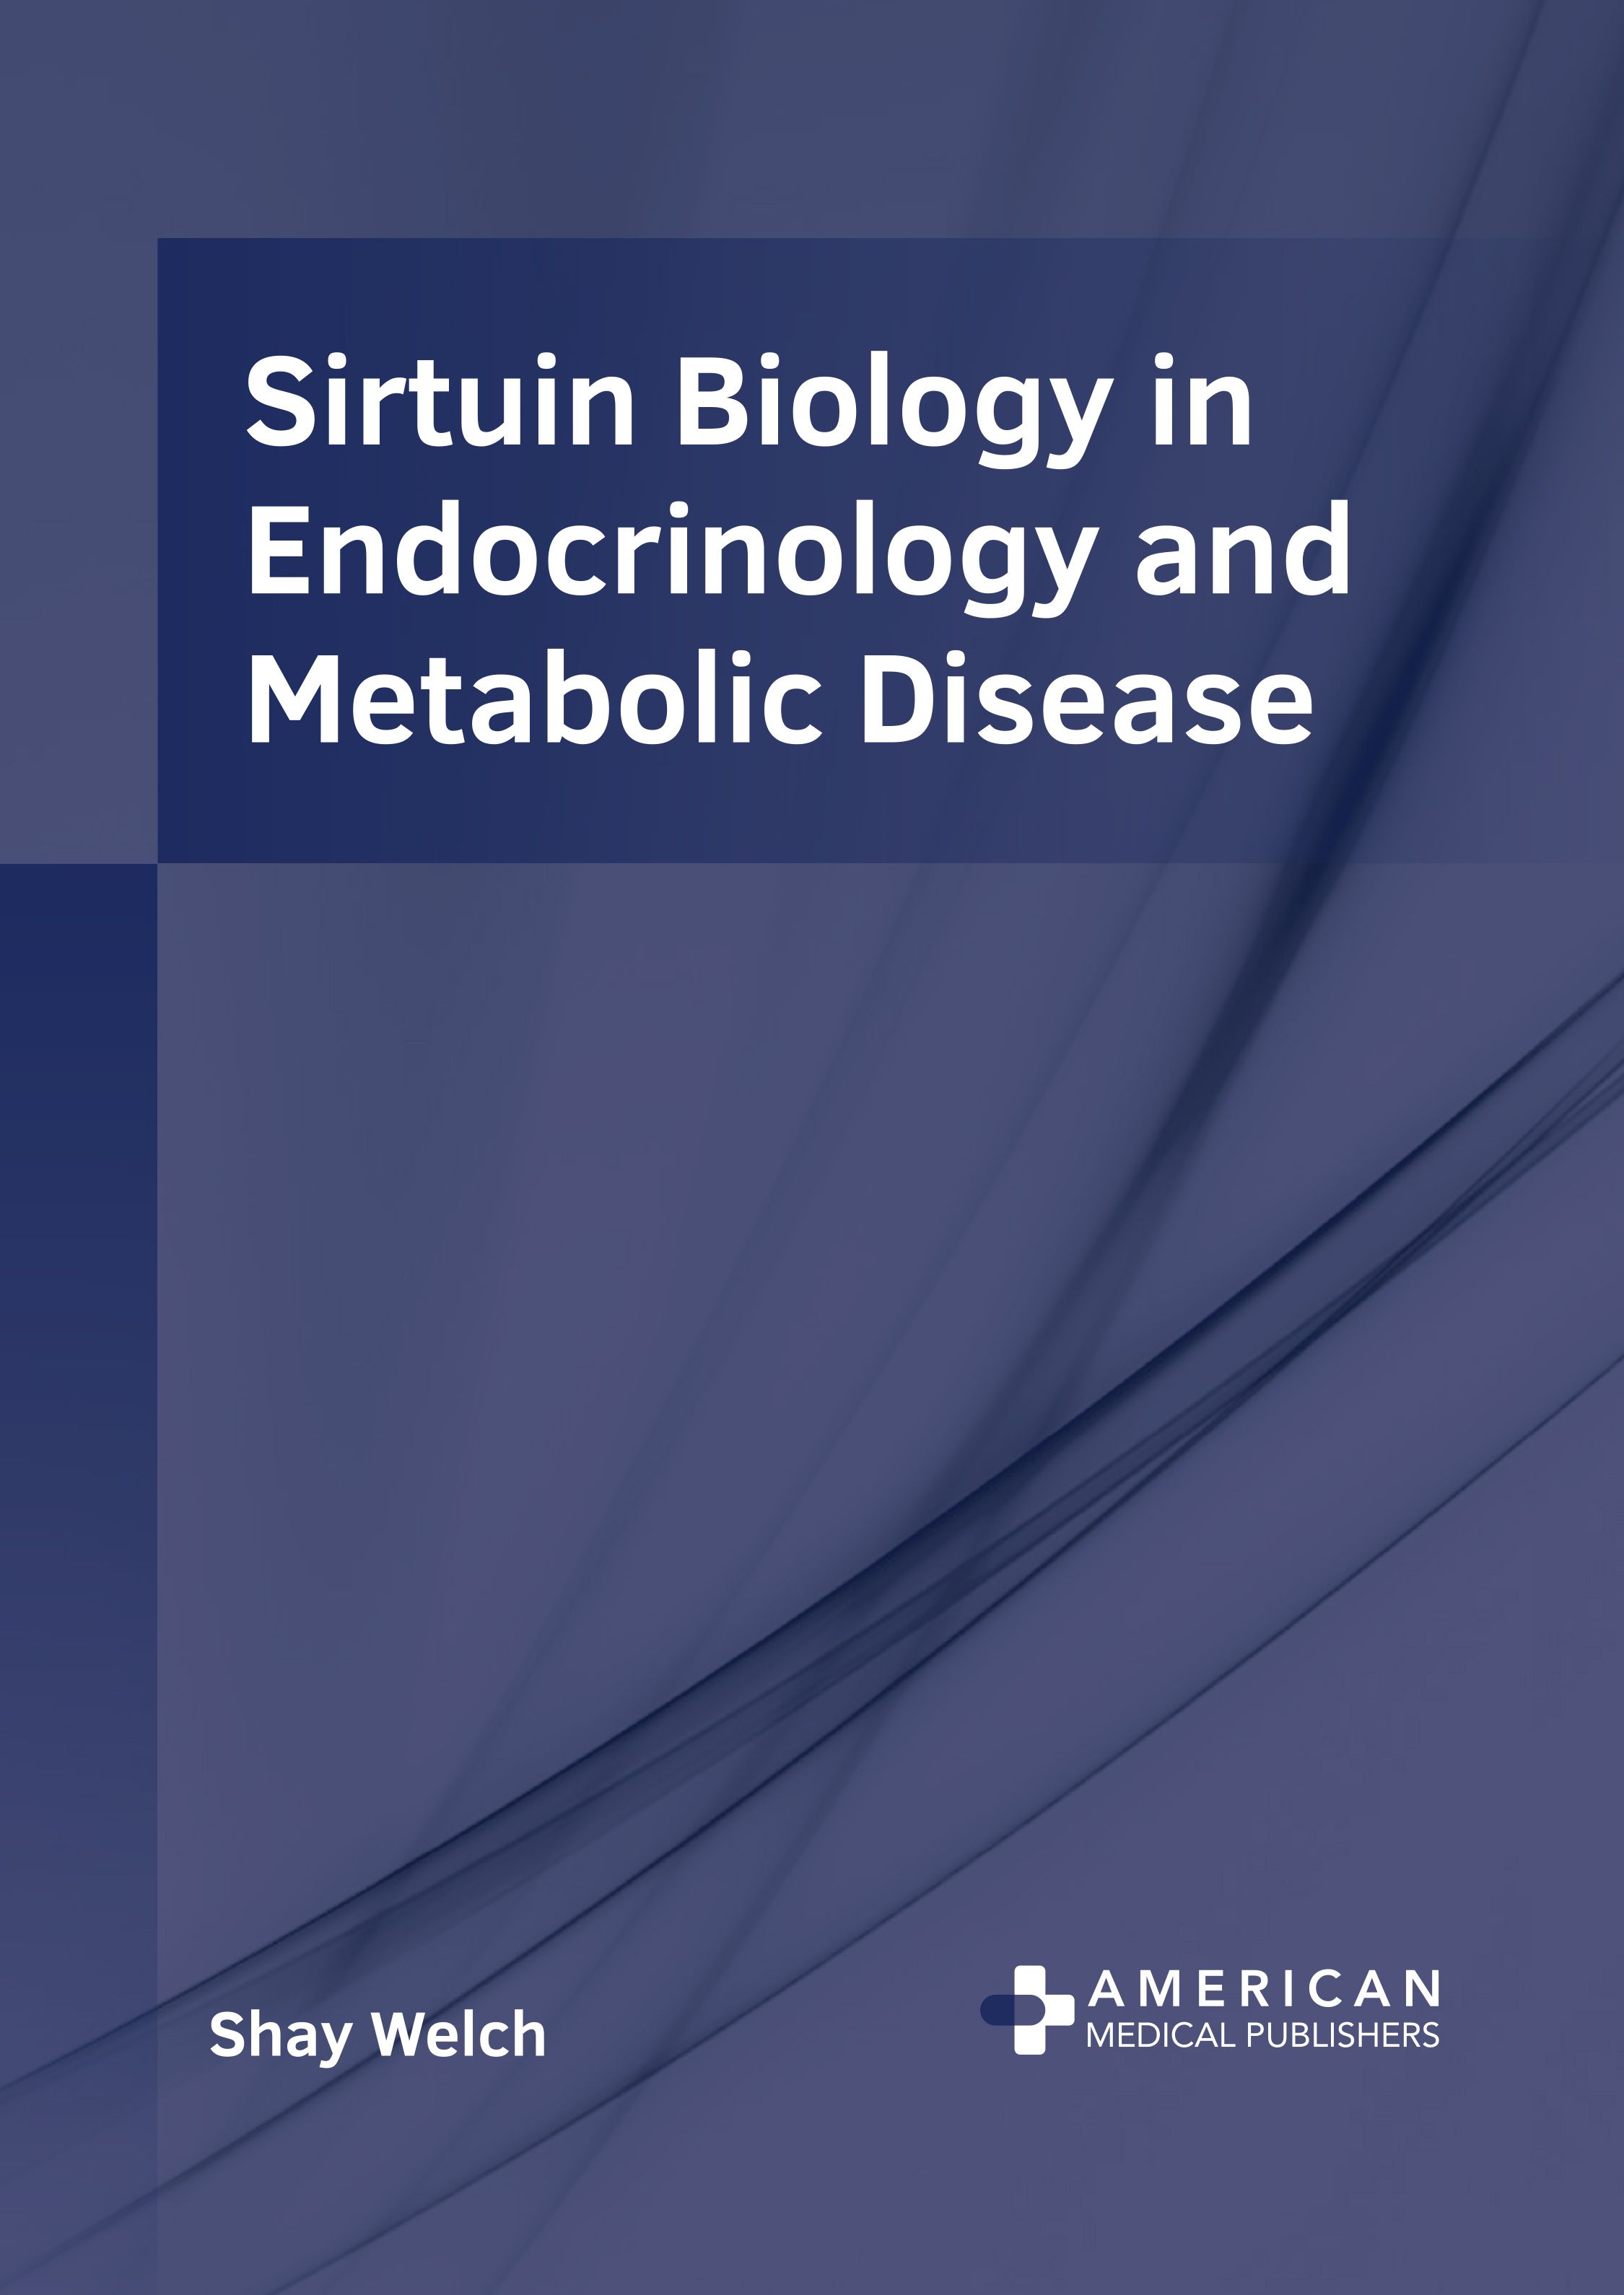 

exclusive-publishers/american-medical-publishers/sirtuin-biology-in-endocrinology-and-metabolic-disease-9798887404554